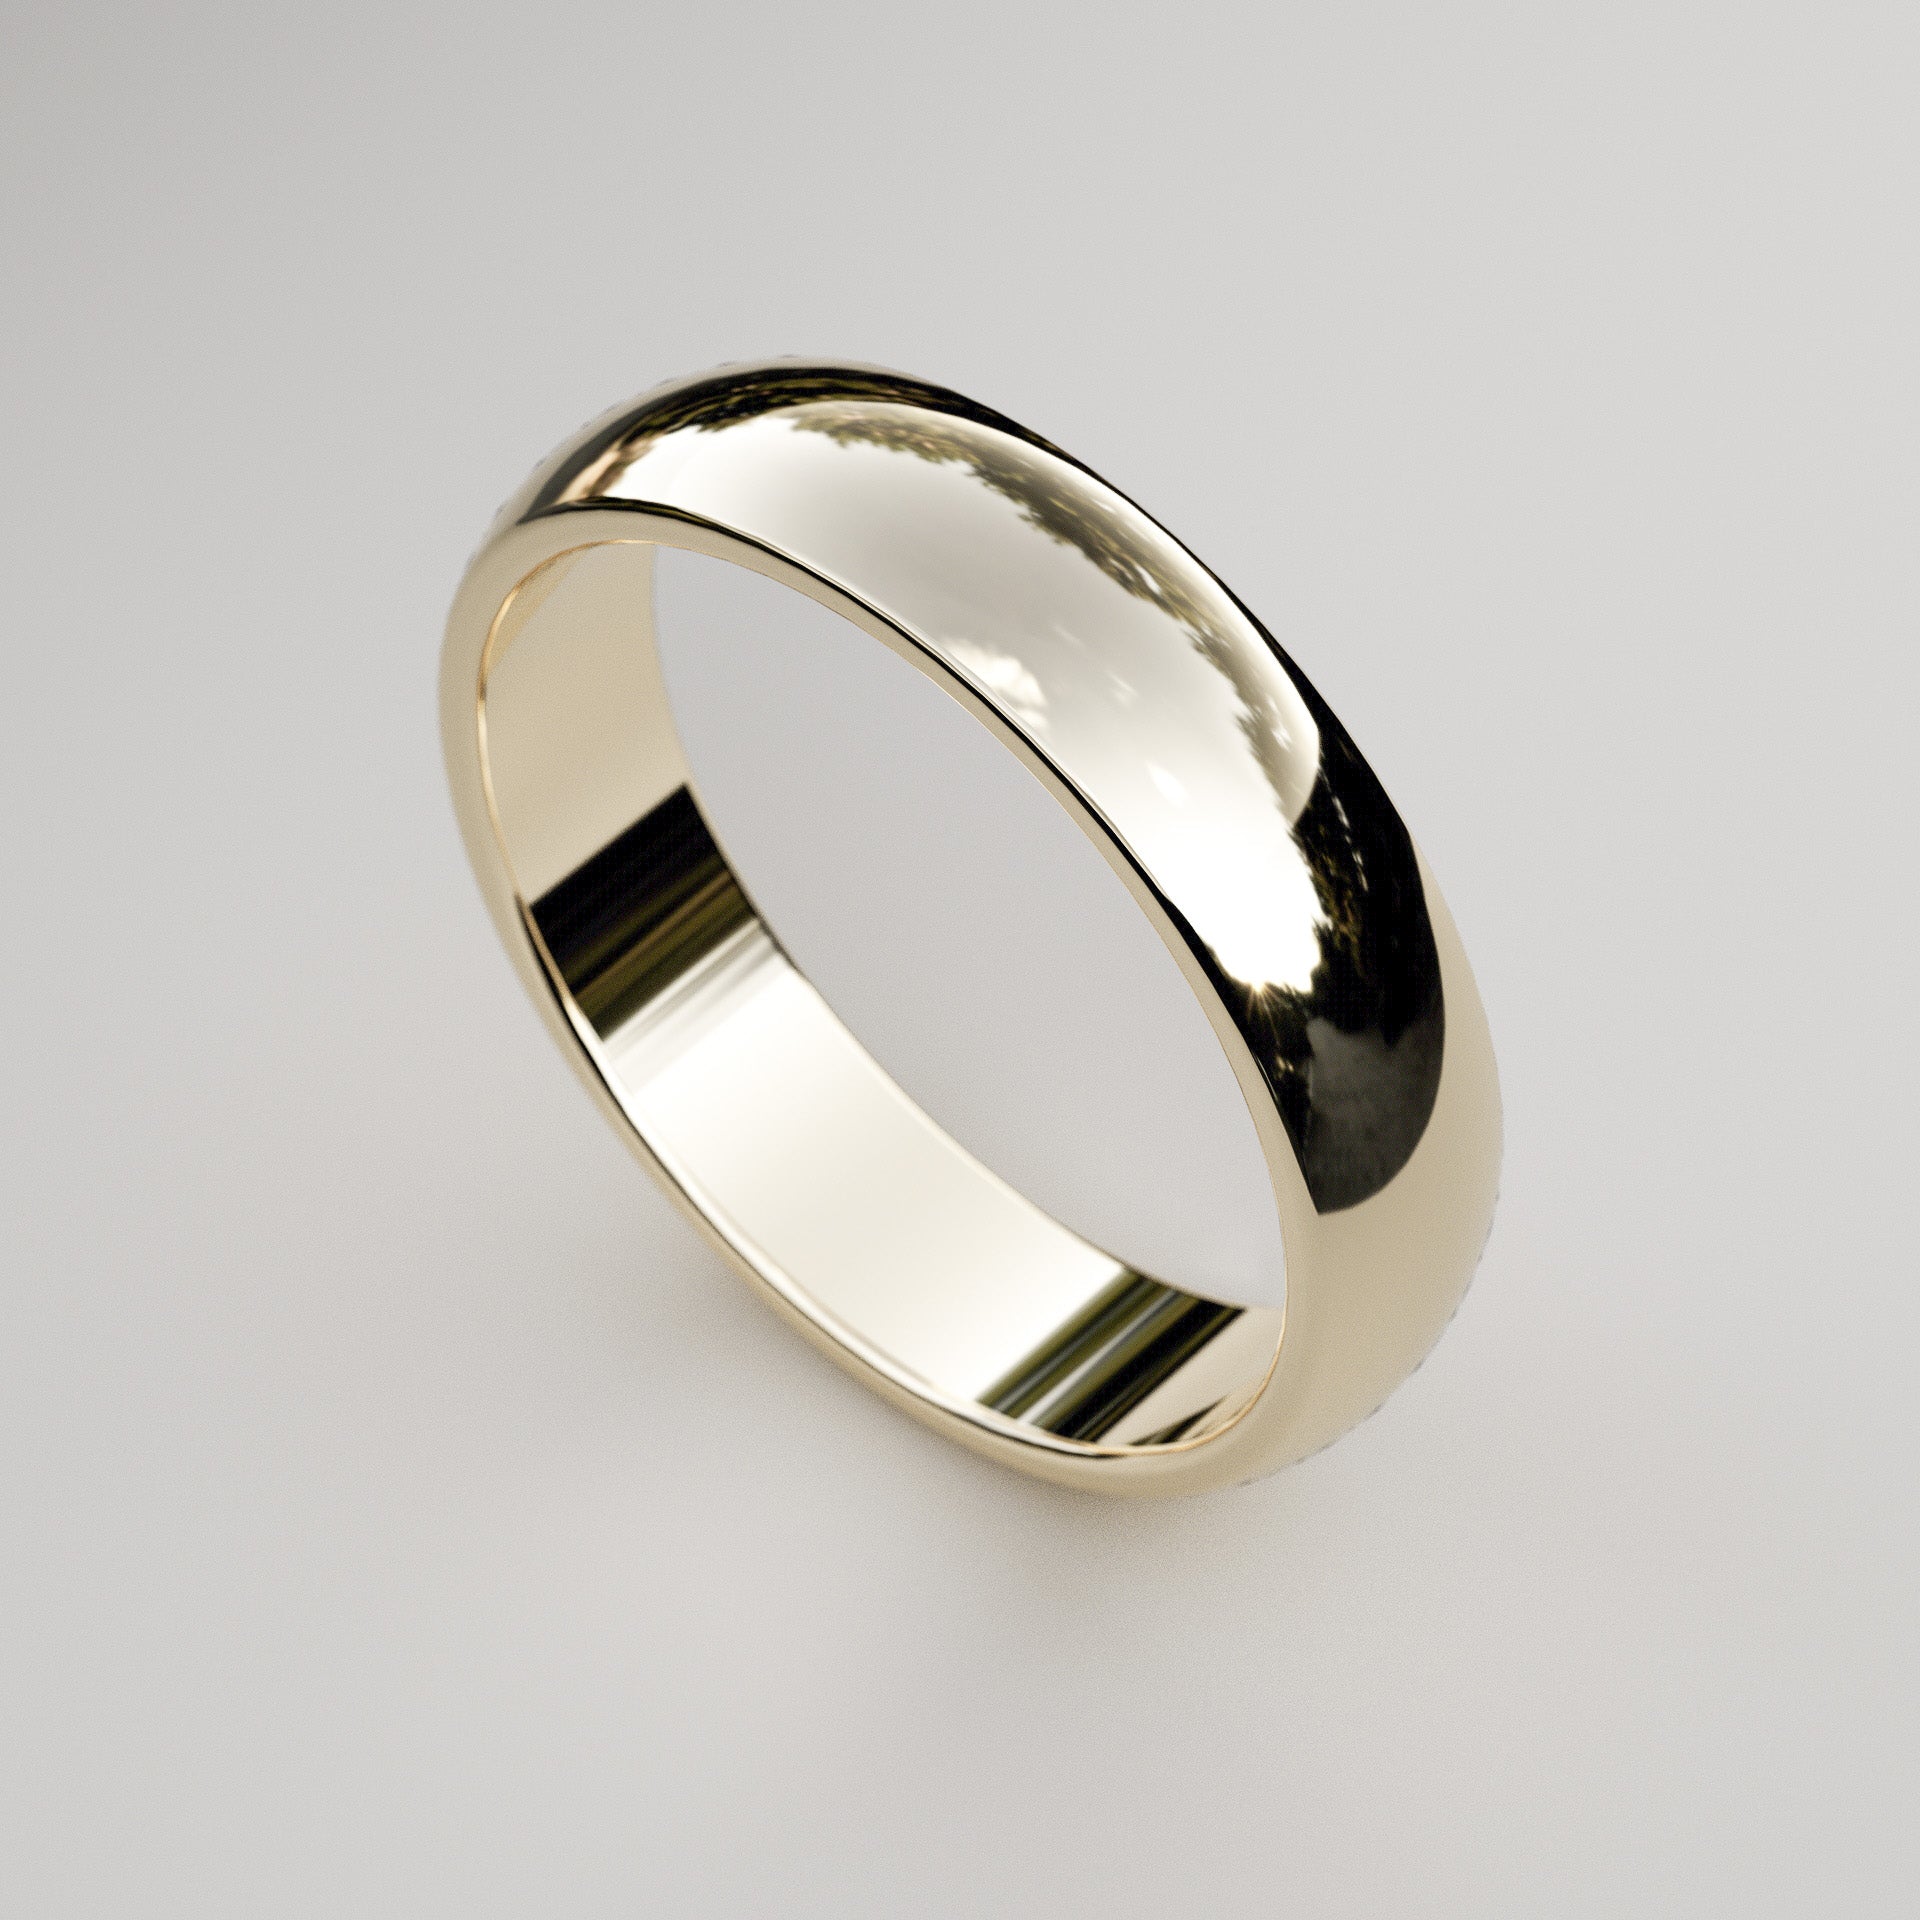 5mm wide simple wedding ring in 14k yellow gold